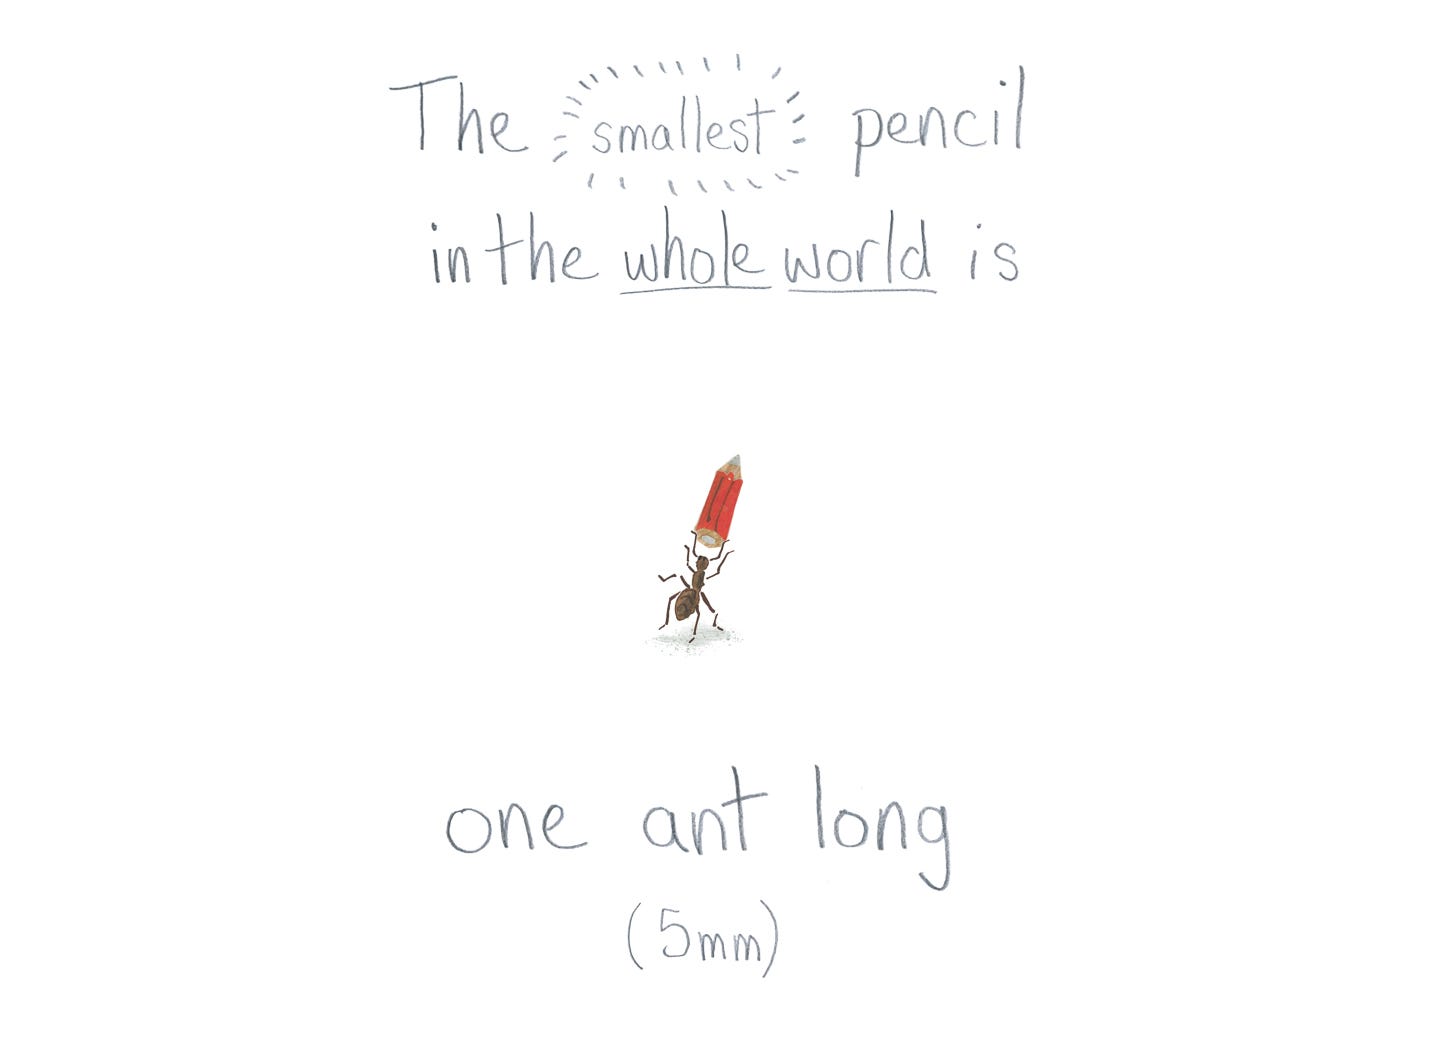 Small watercolour illustration of an ant holding up a tiny red pencil. Handwritten text reads: the smallest pencil in the whole world is one ant long (5mm)